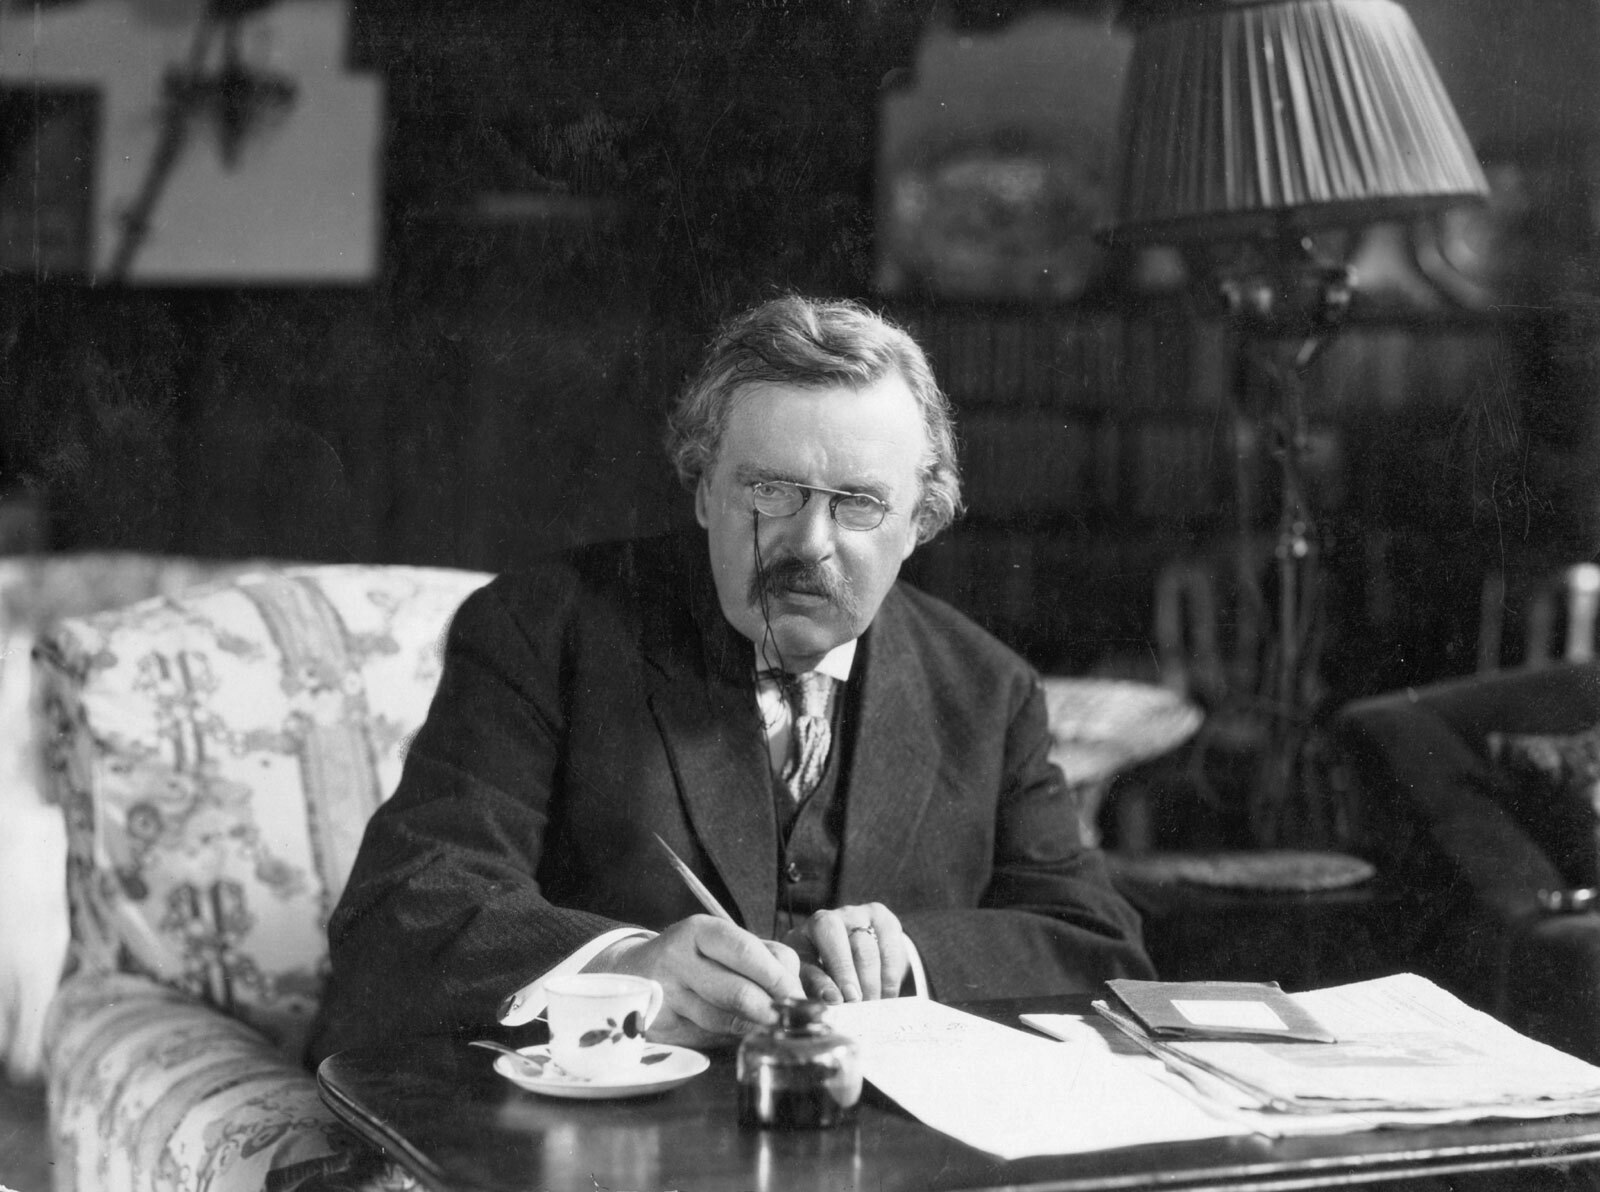 Gilbert Keith Chesterton was an Catholic English writer, philosopher, poet and apologist whose work has inspired countless through the past century. (Wikimedia Commons)